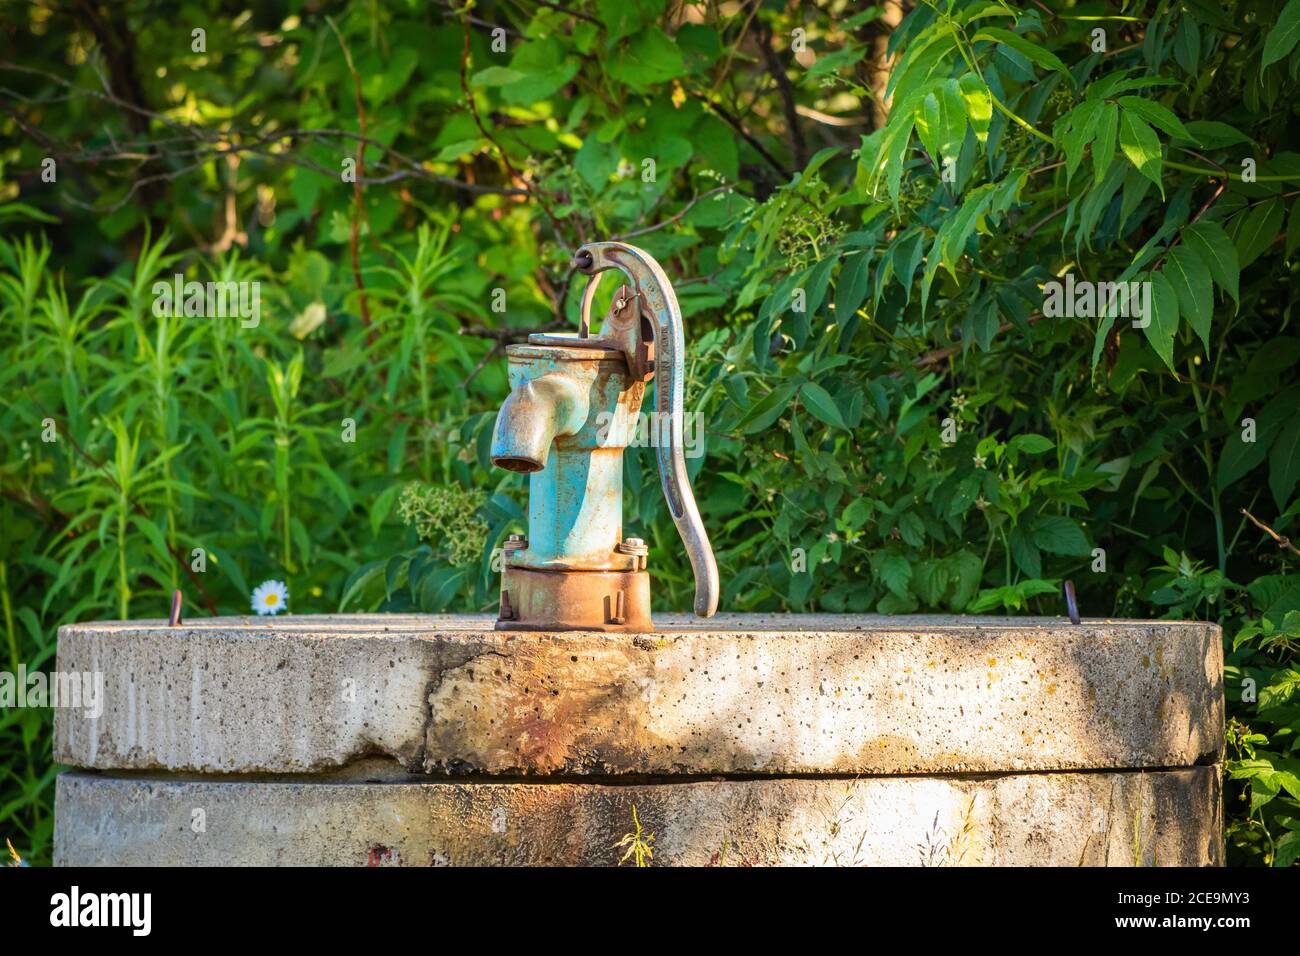 Garden Hand Water Well Pump High Resolution Stock Photography and